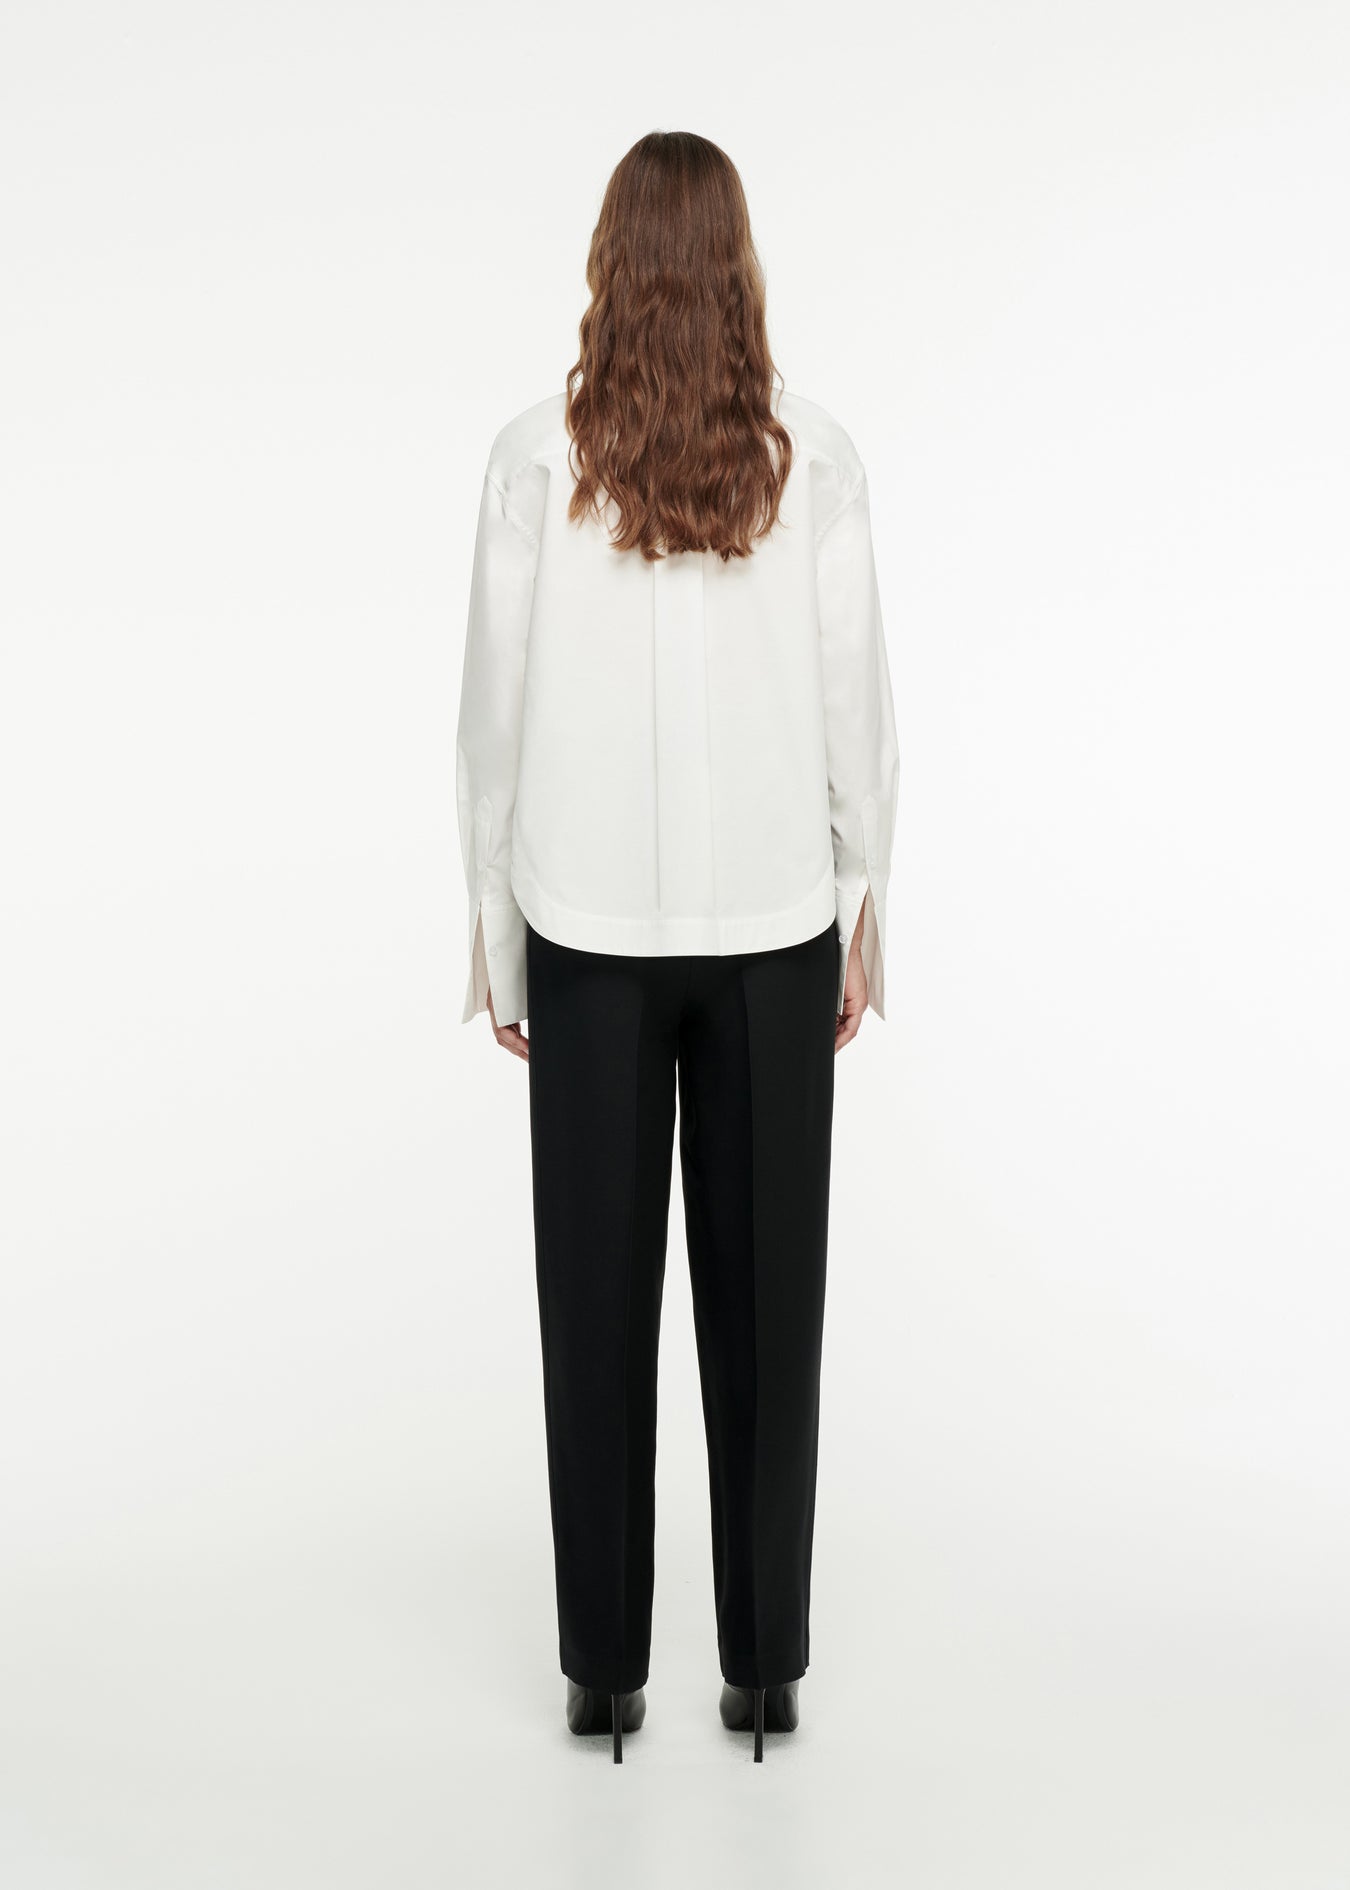 The back of a woman wearing the Oversized Organic Cotton Shirt in White 